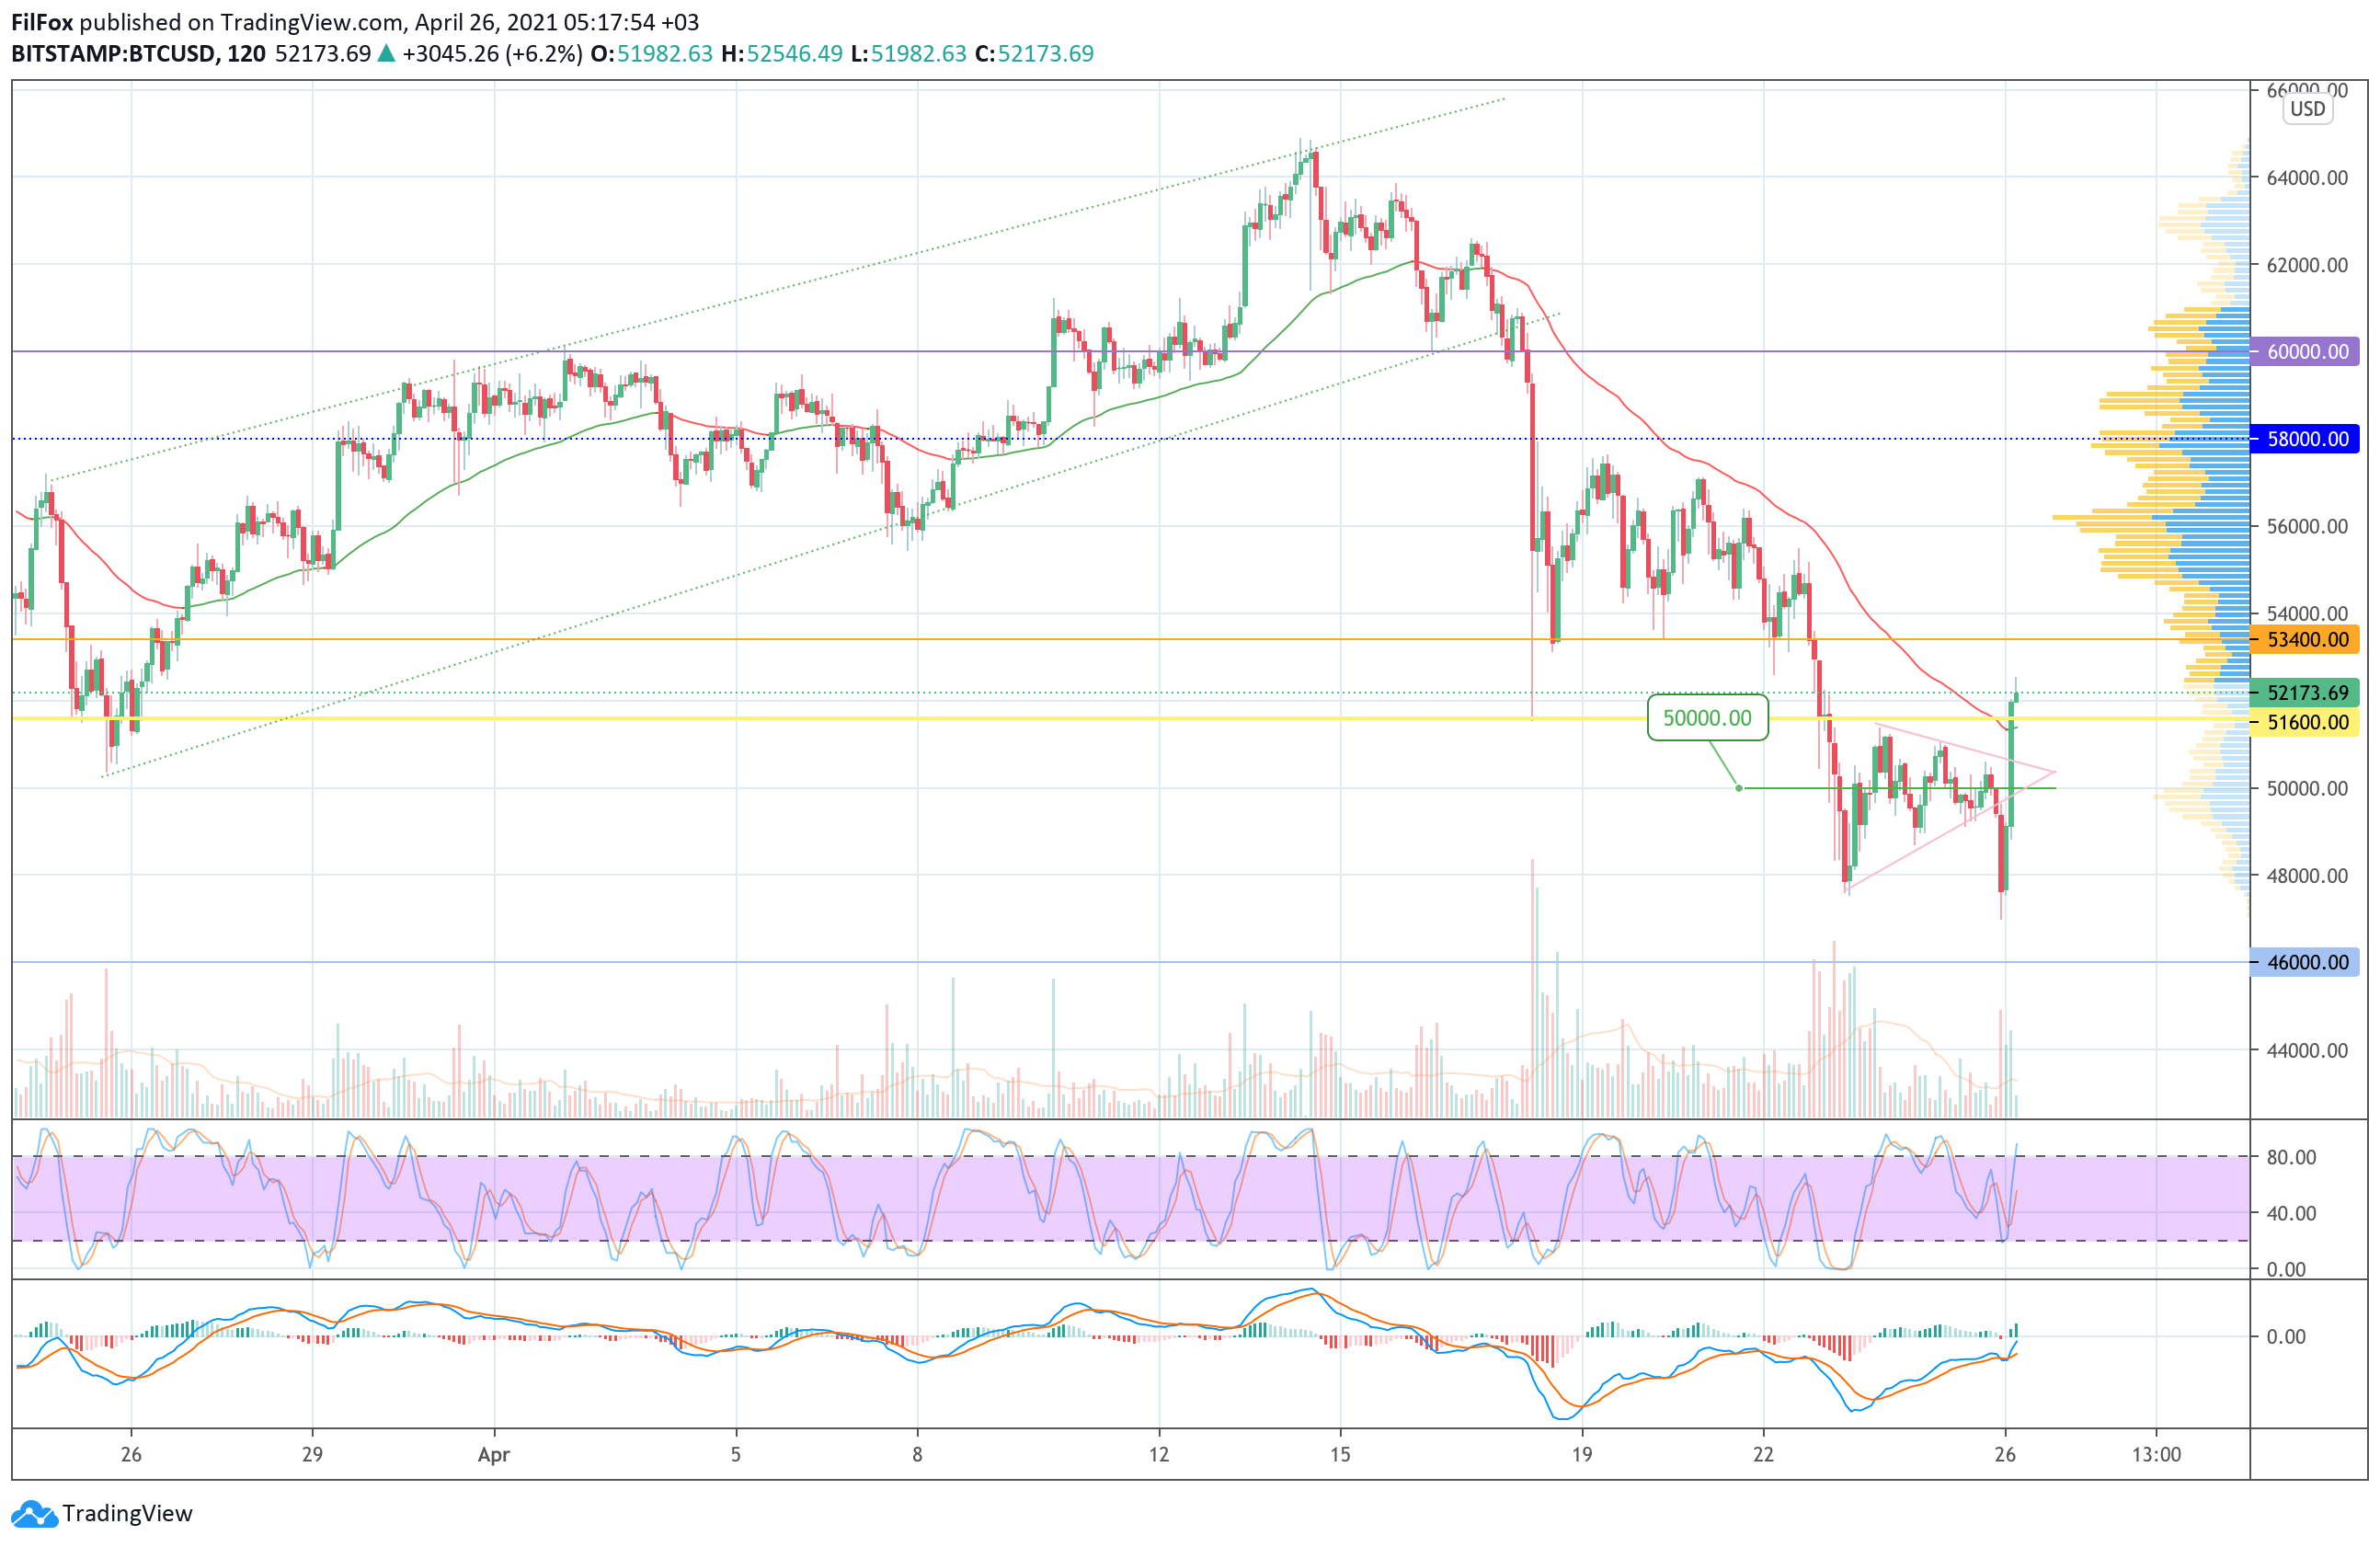 Analysis of the prices of Bitcoin, Ethereum, XRP for 04/26/2021